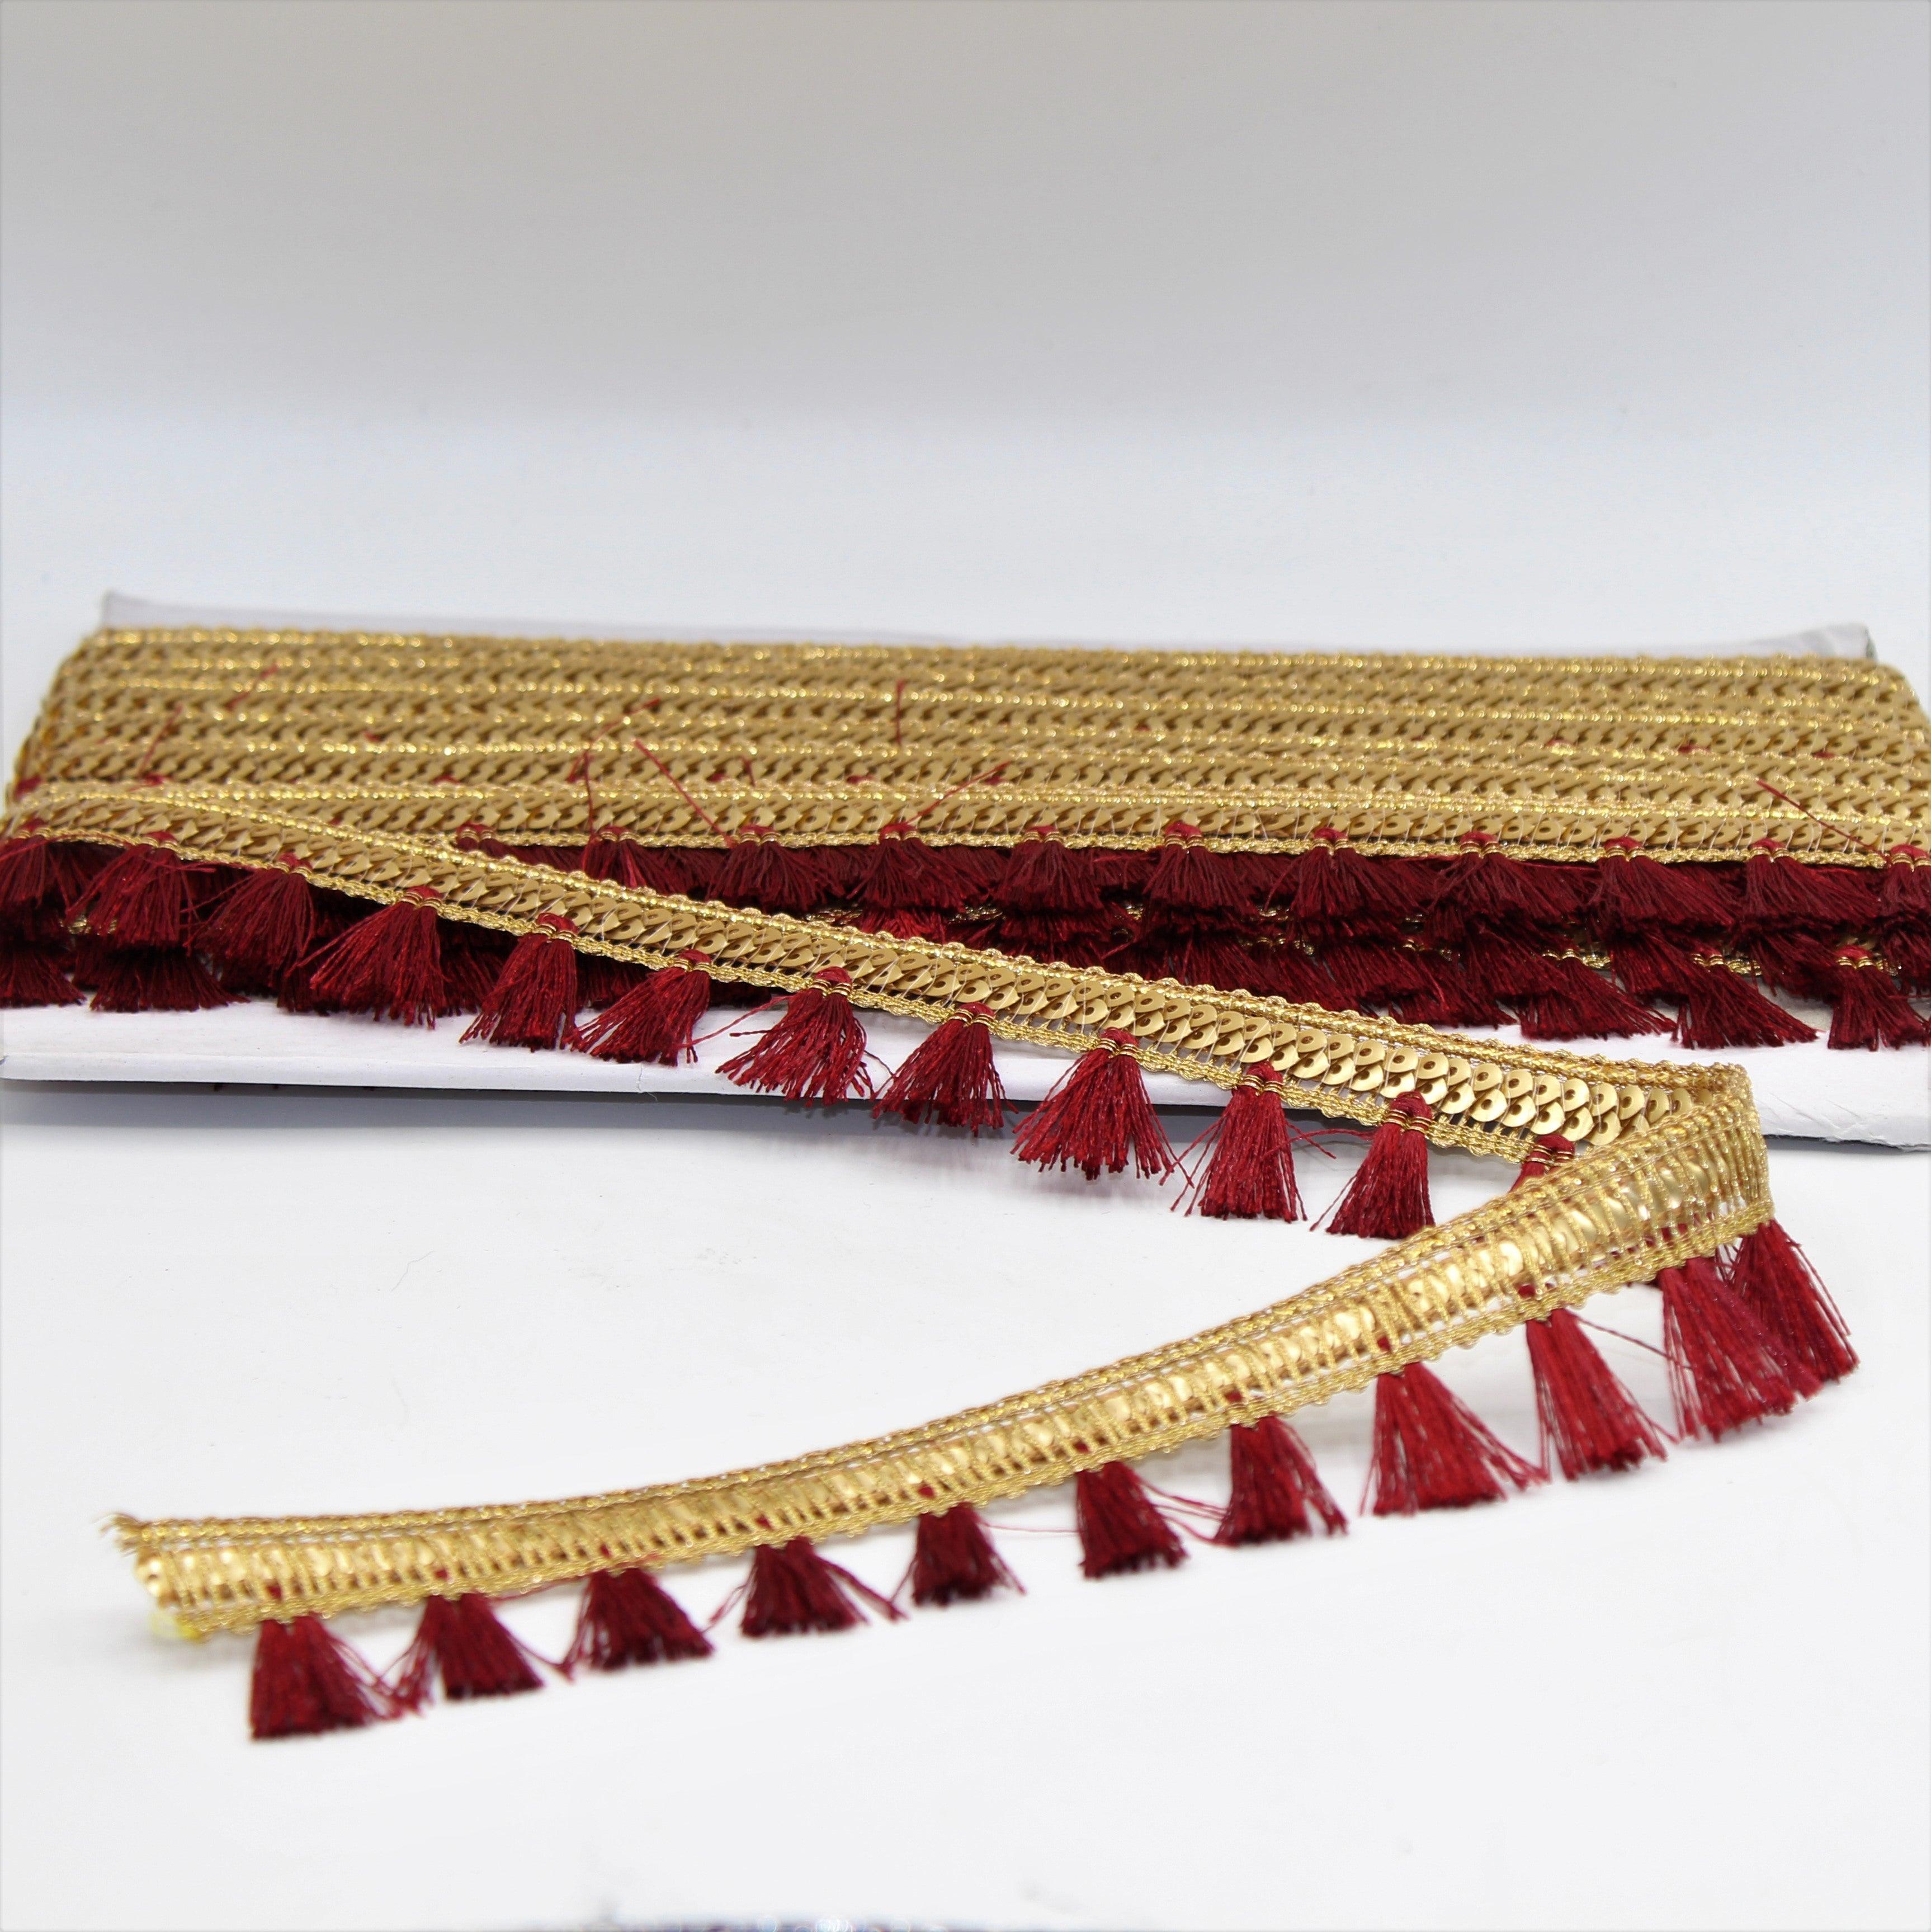 1Meter Golden ribbon with Sequins and Tassel in Different Colors 20mm - ACCESSOIRES LEDUC